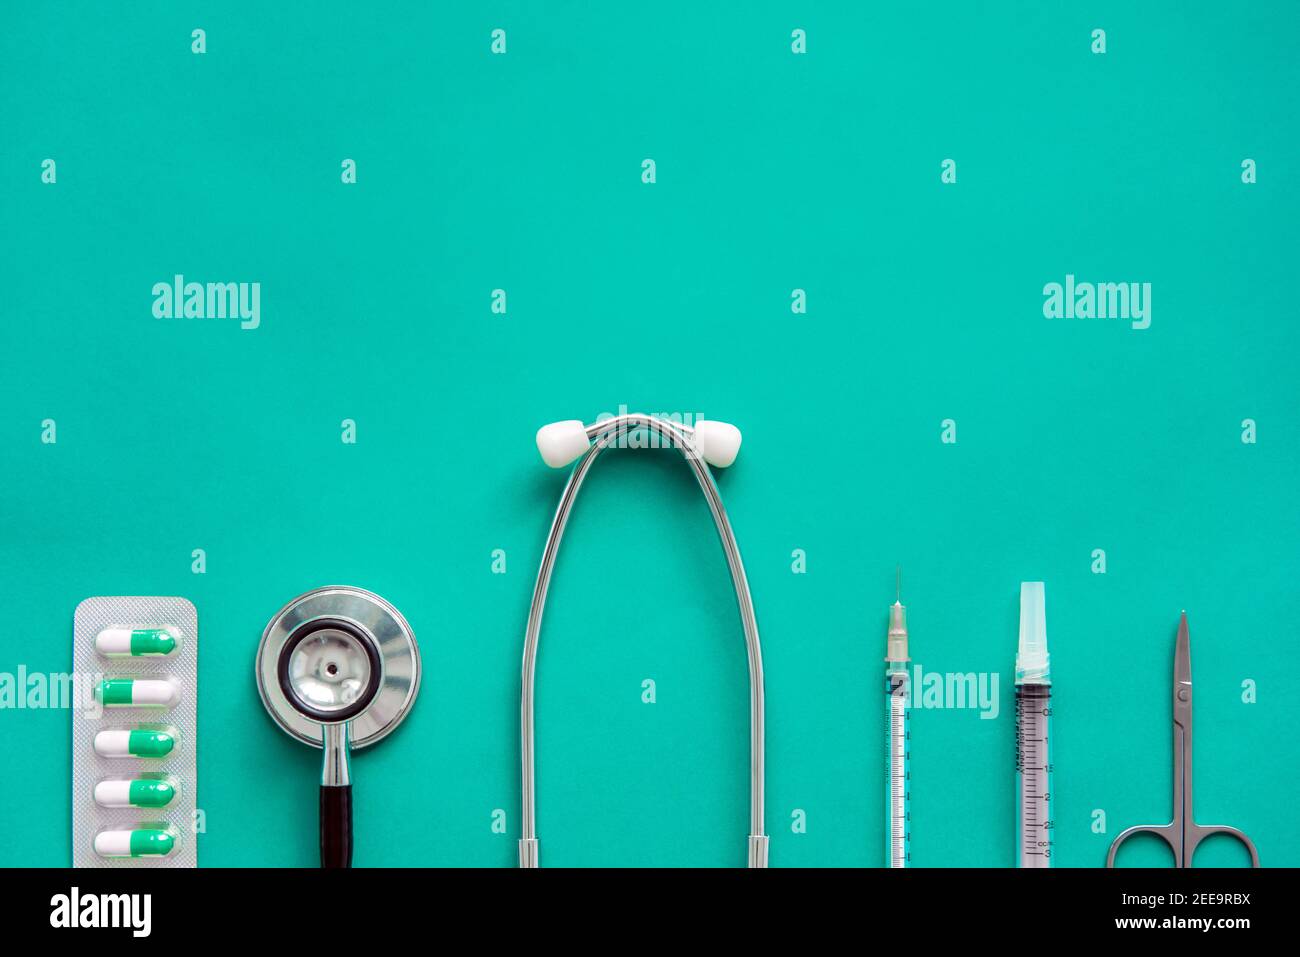 Medical equipments including stethoscope, scissors, syringes and capsules on green background, top view Stock Photo